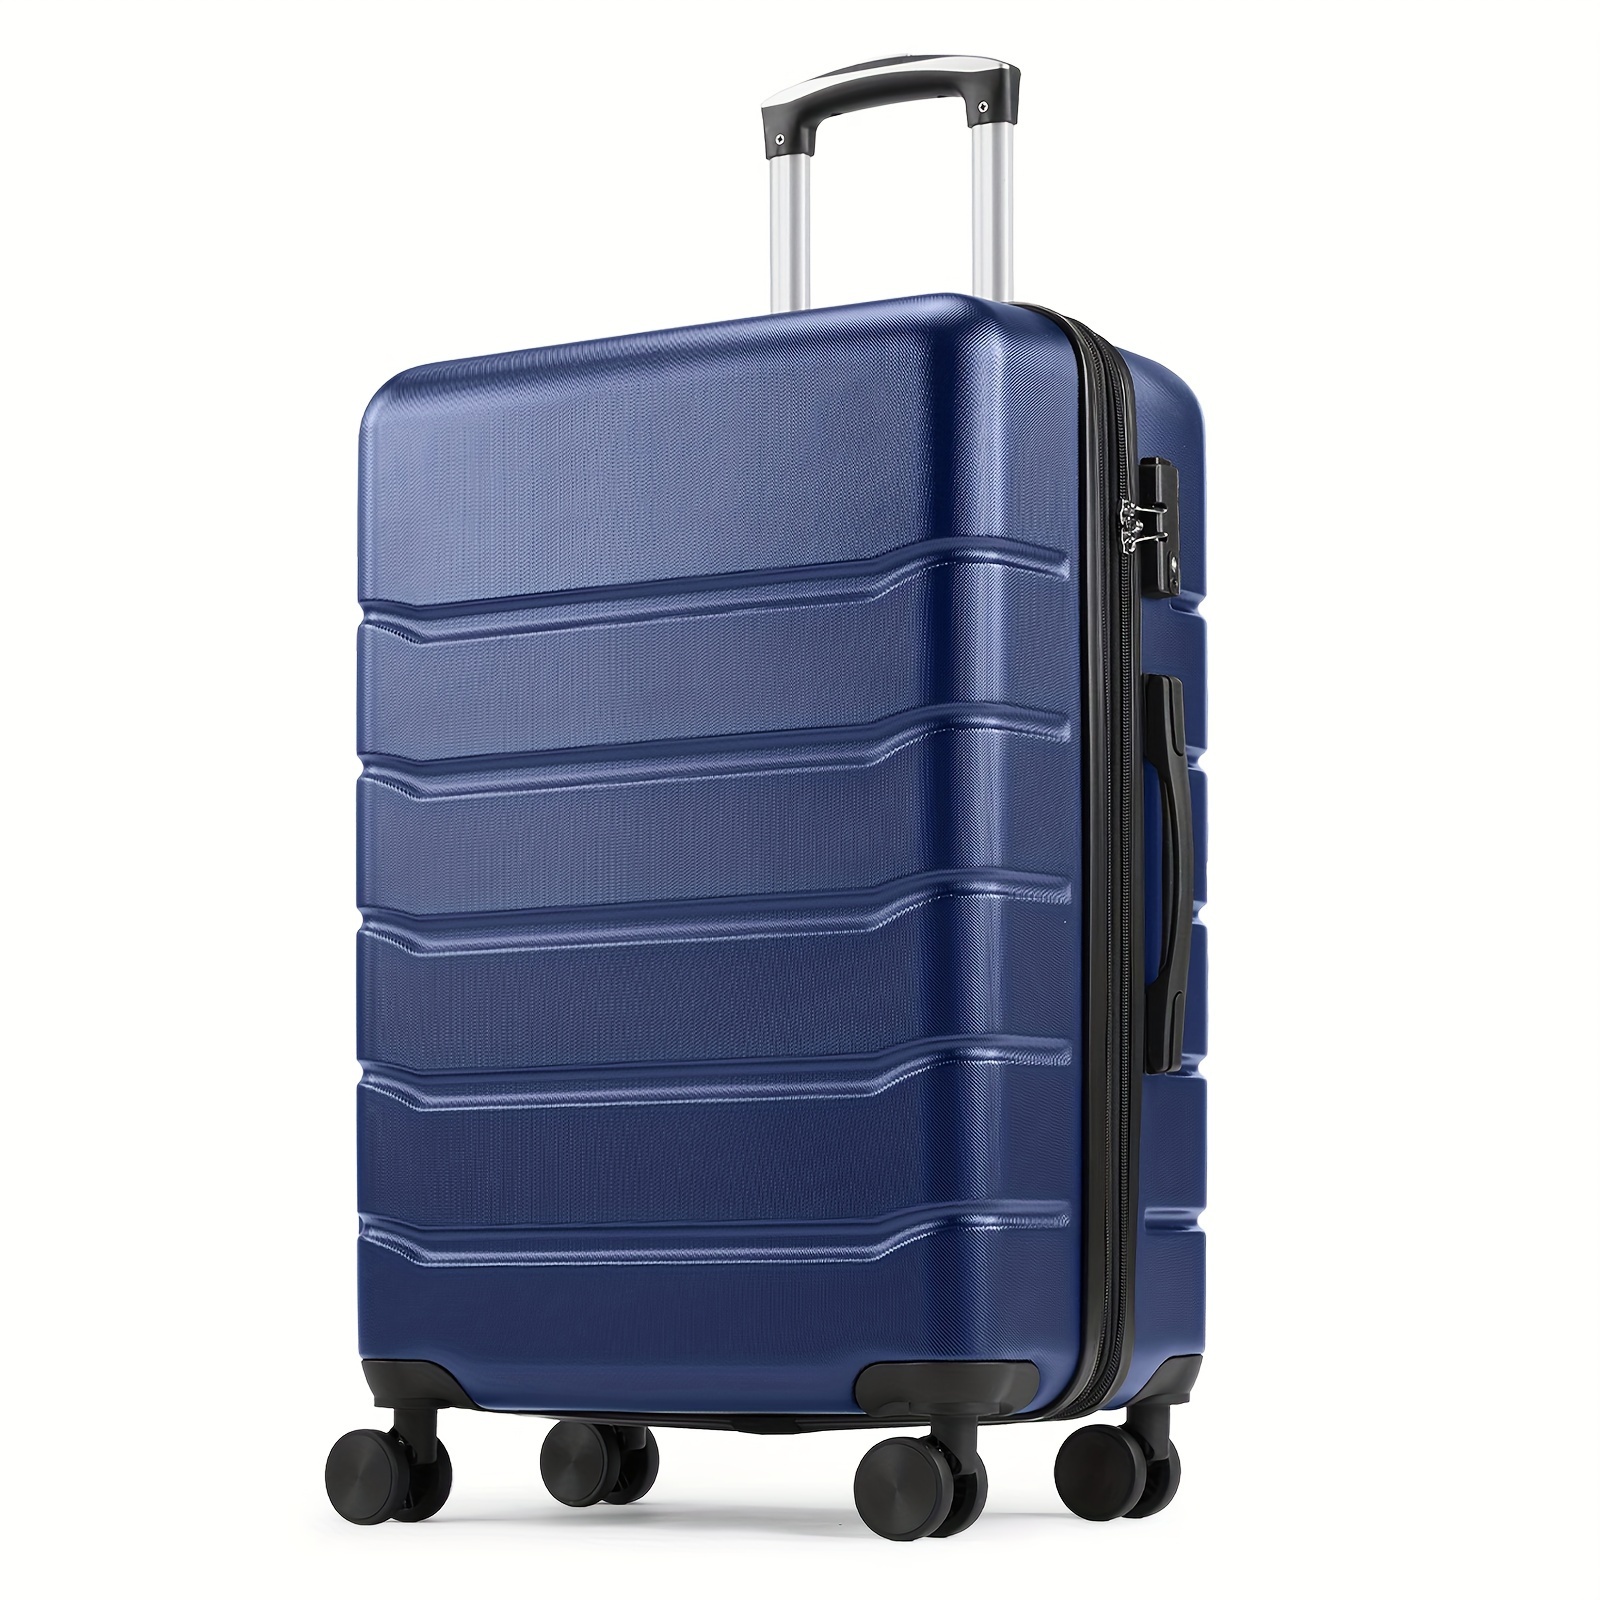 

24 Inch Travel In Style And Security With Our Hard Shell Abs Suitcase Equipped With Double Spinner Wheels. This Lightweight, Expandable Rolling Luggage Features A Tsa Lock For Adde